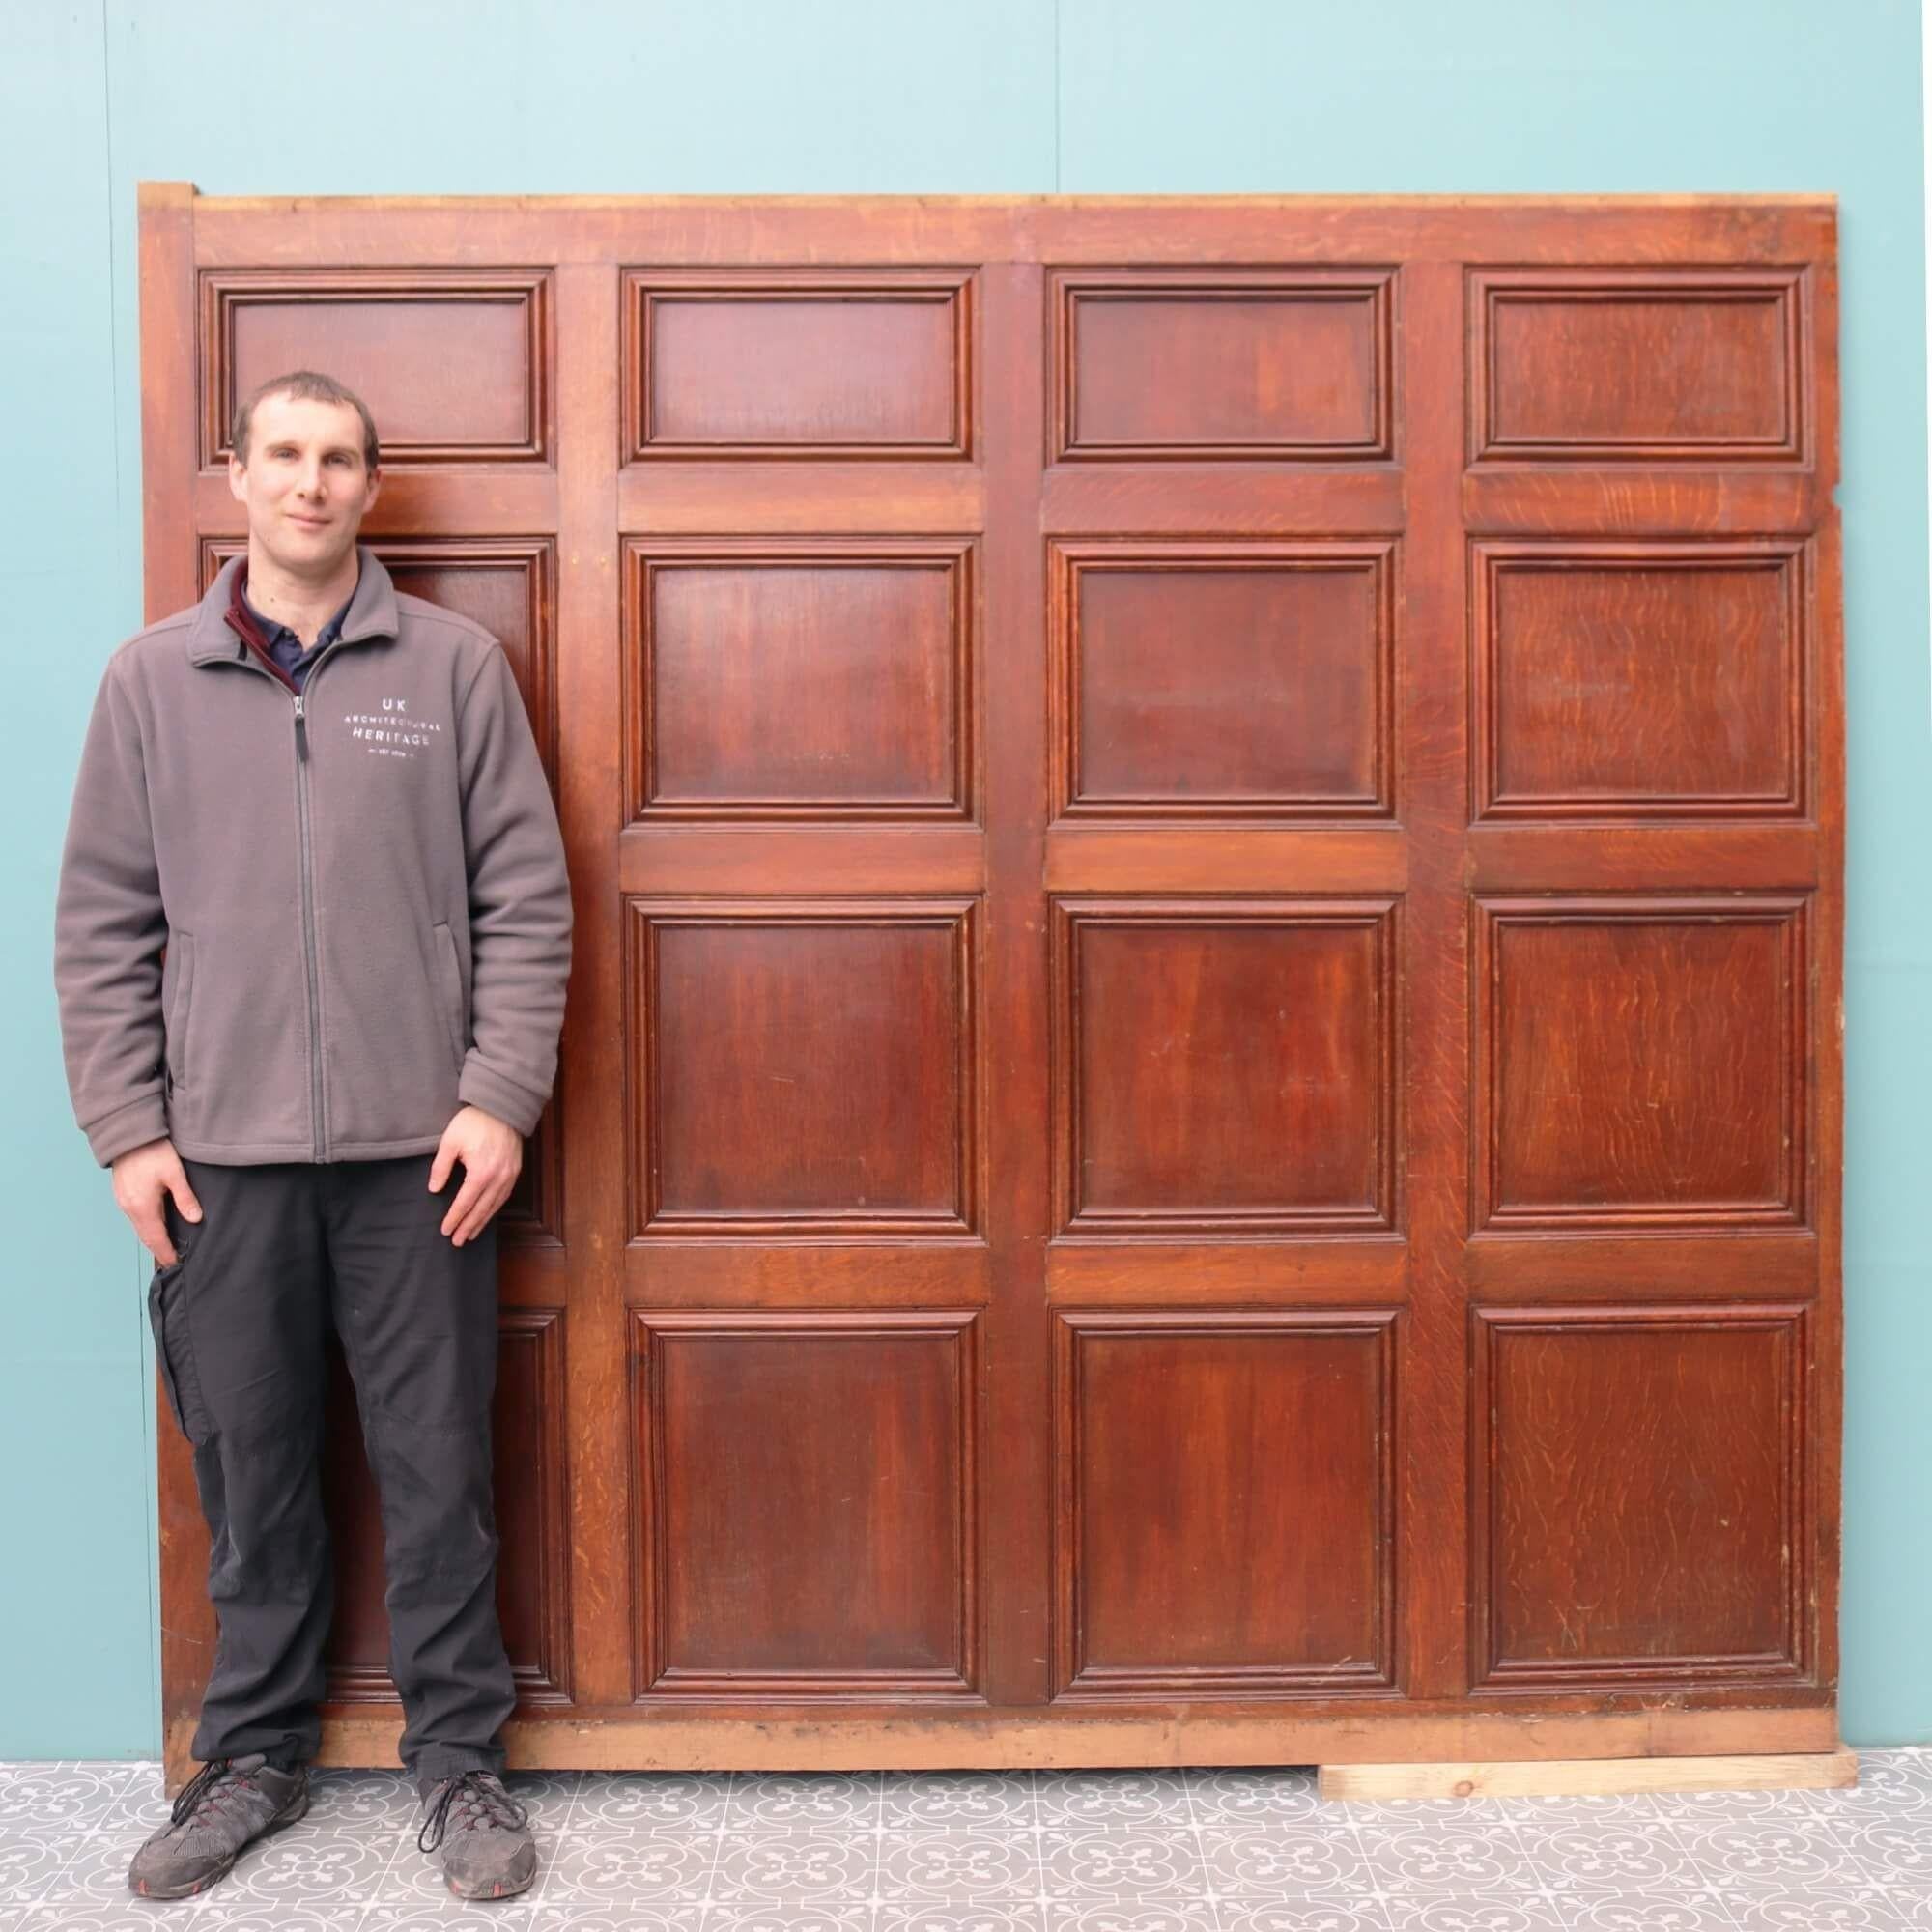 A long run of full height Victorian style wooden wall paneling with a rich dark oak finish dating from the early 1900s. Reclaimed from a property in Liverpool UK, this set of antique wall paneling comprises of 12 tall individual panels of varying